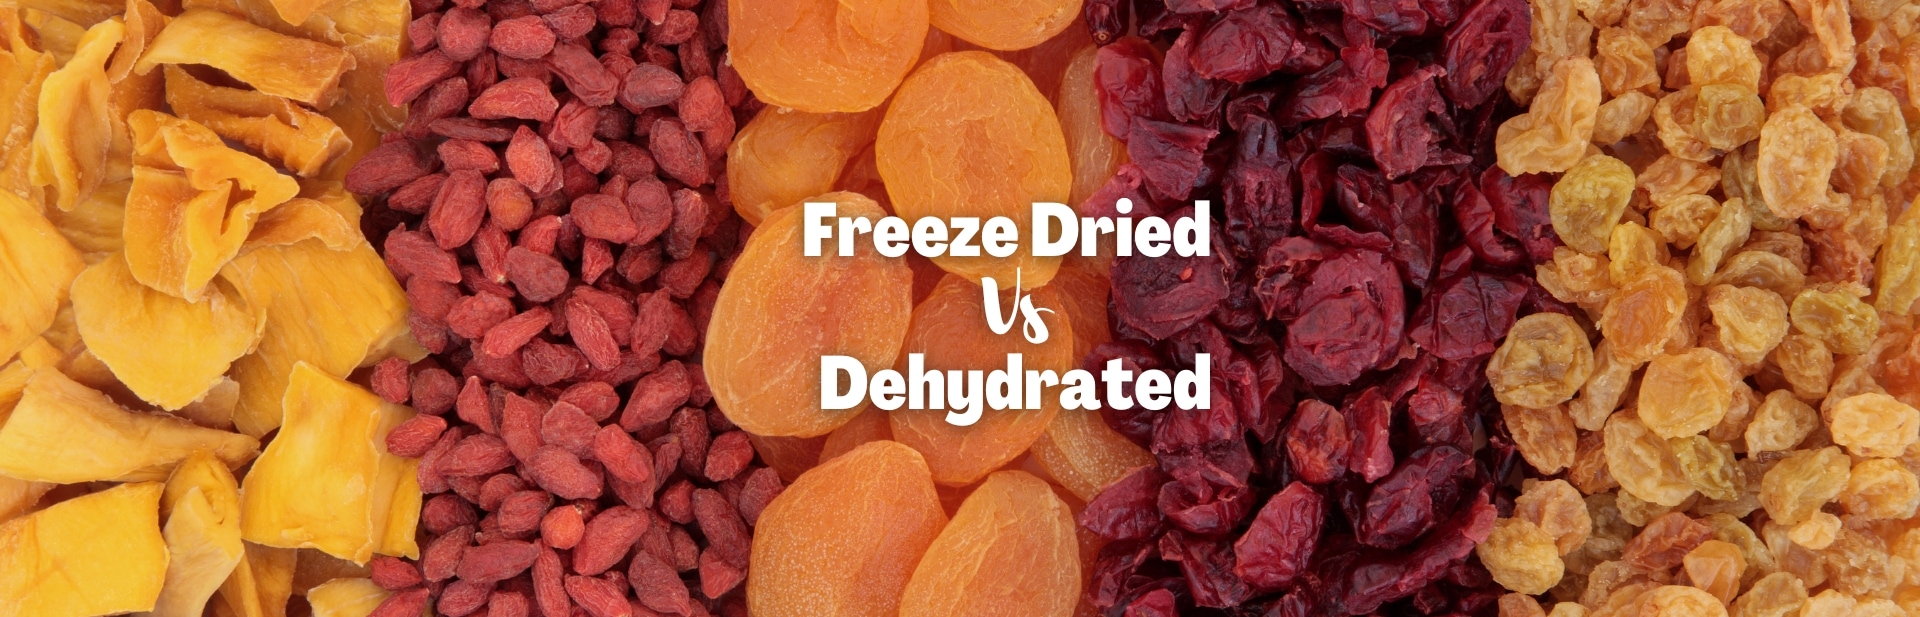 Freeze-Dried vs Dehydrated Food: Which Lasts the Longest?